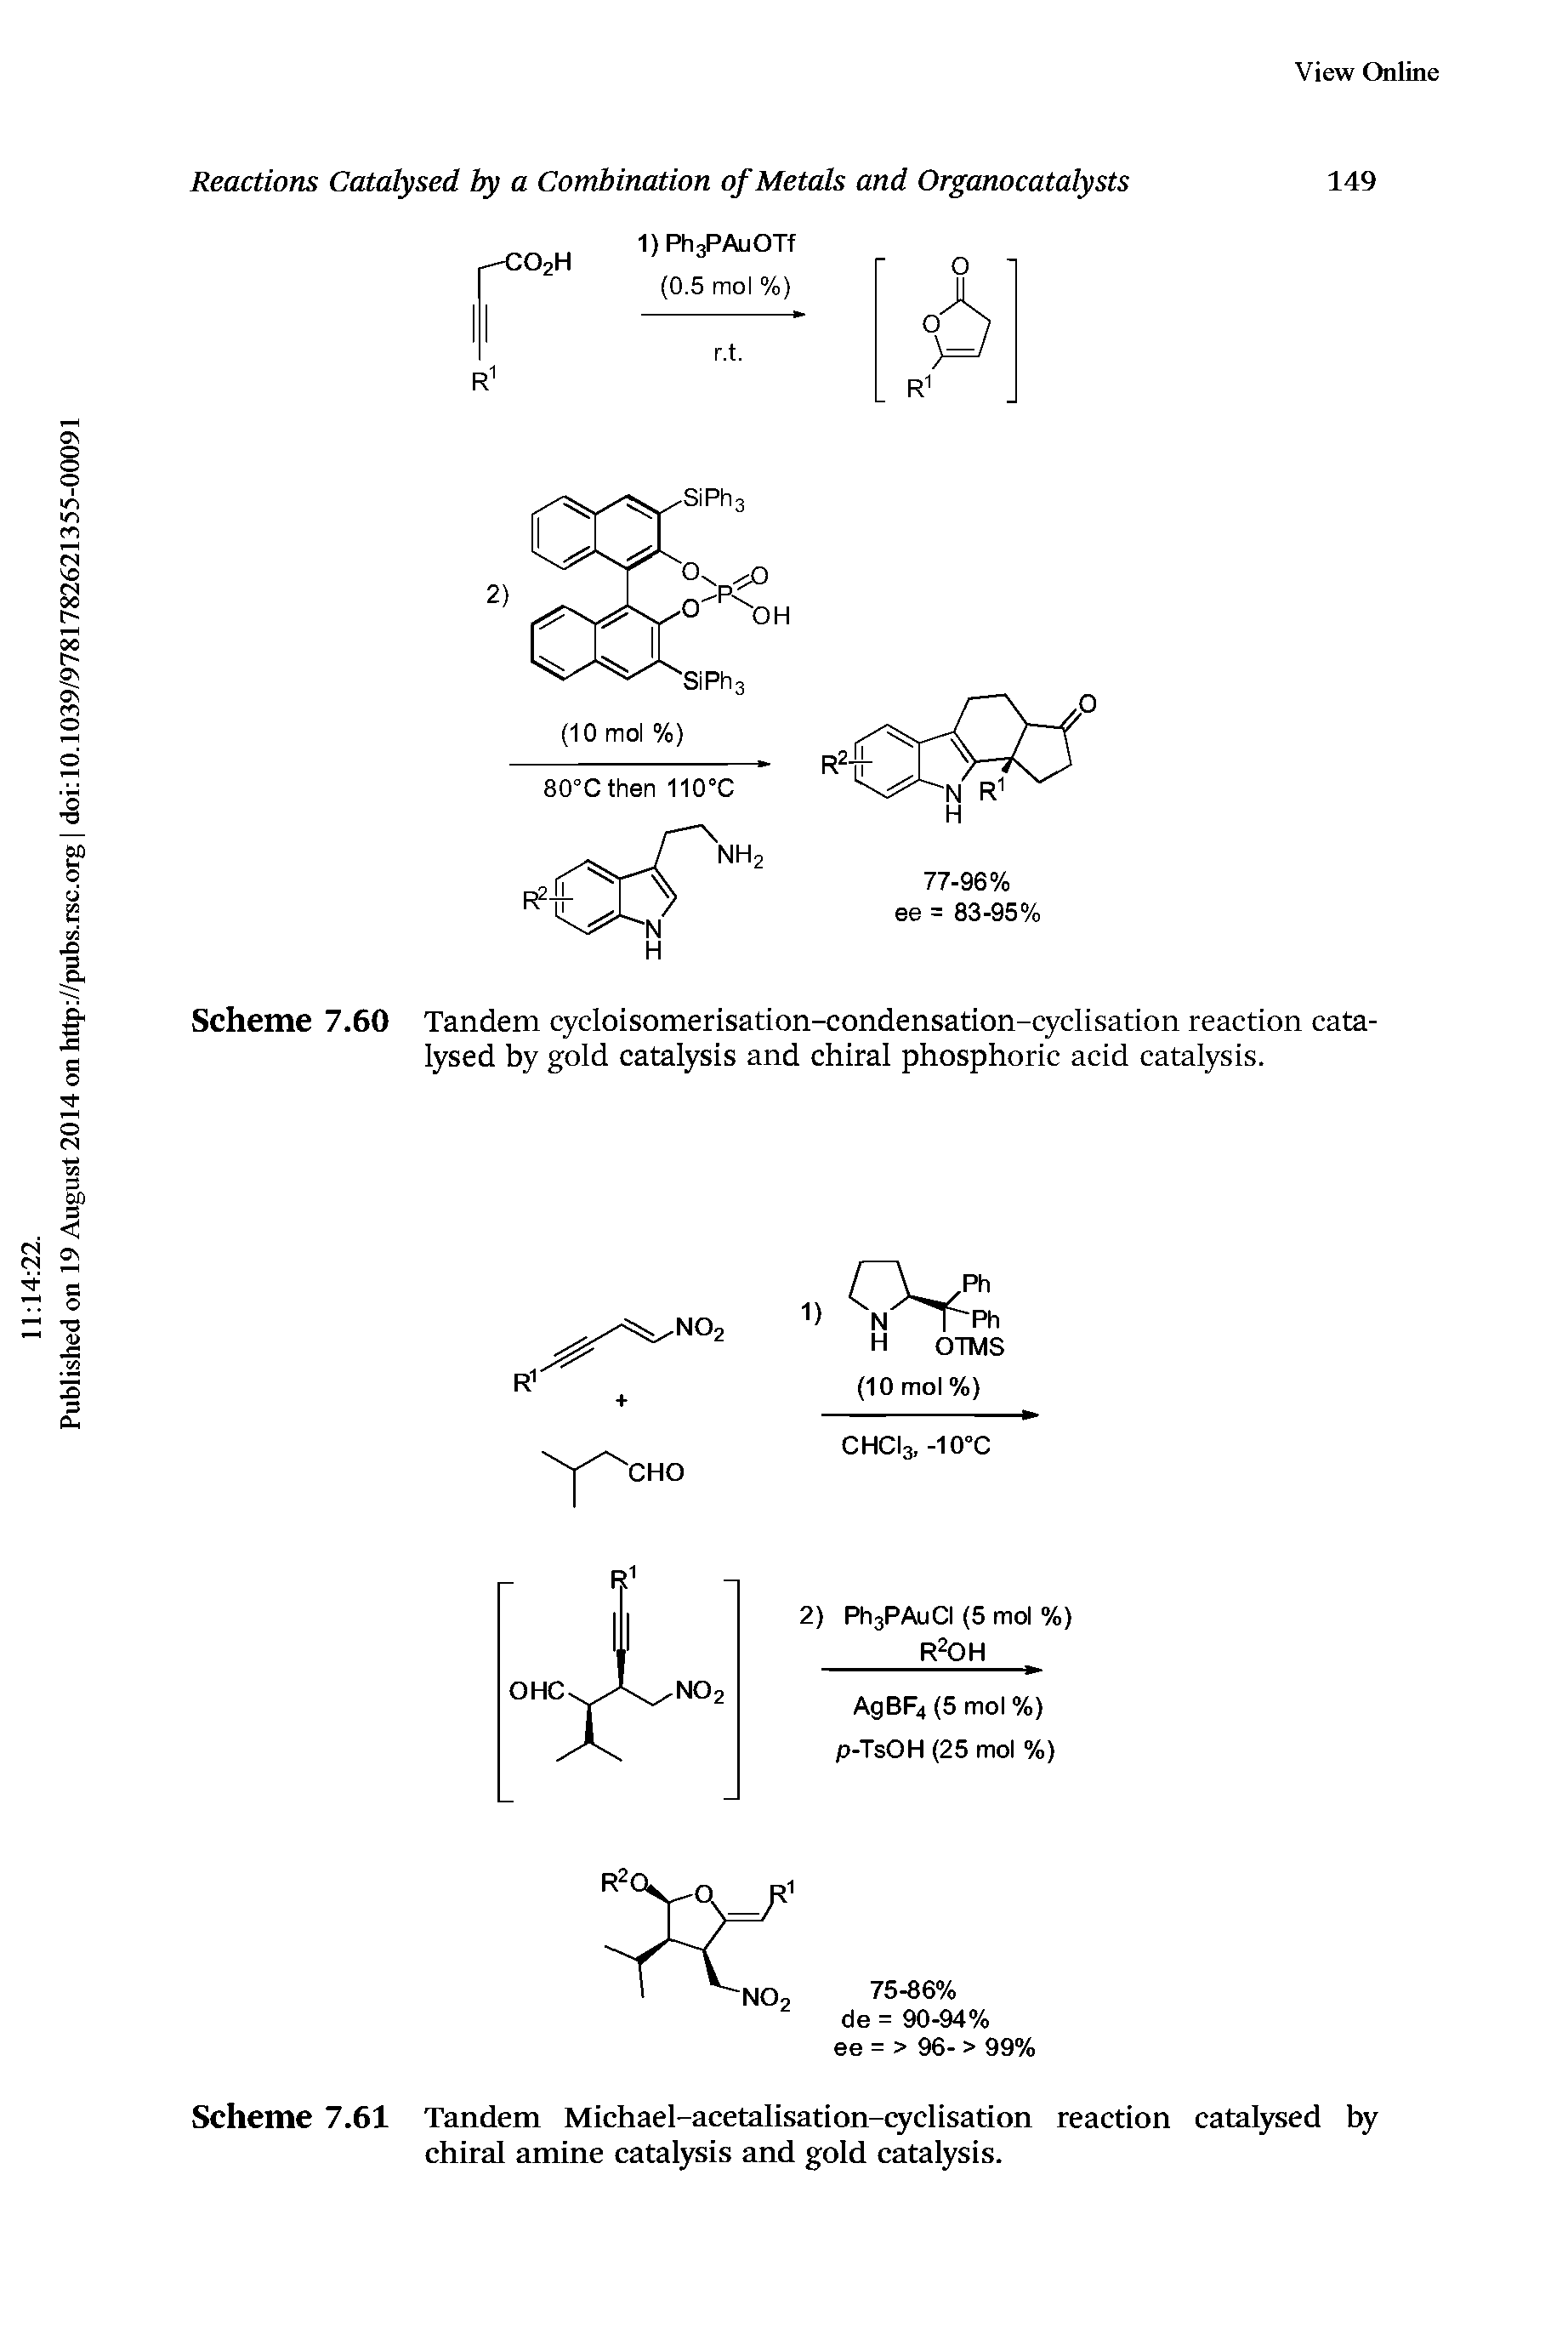 Scheme 7.61 Tandem Michael-acetalisation-cyclisation reaction catalysed by chiral amine catal) is and gold catalysis.